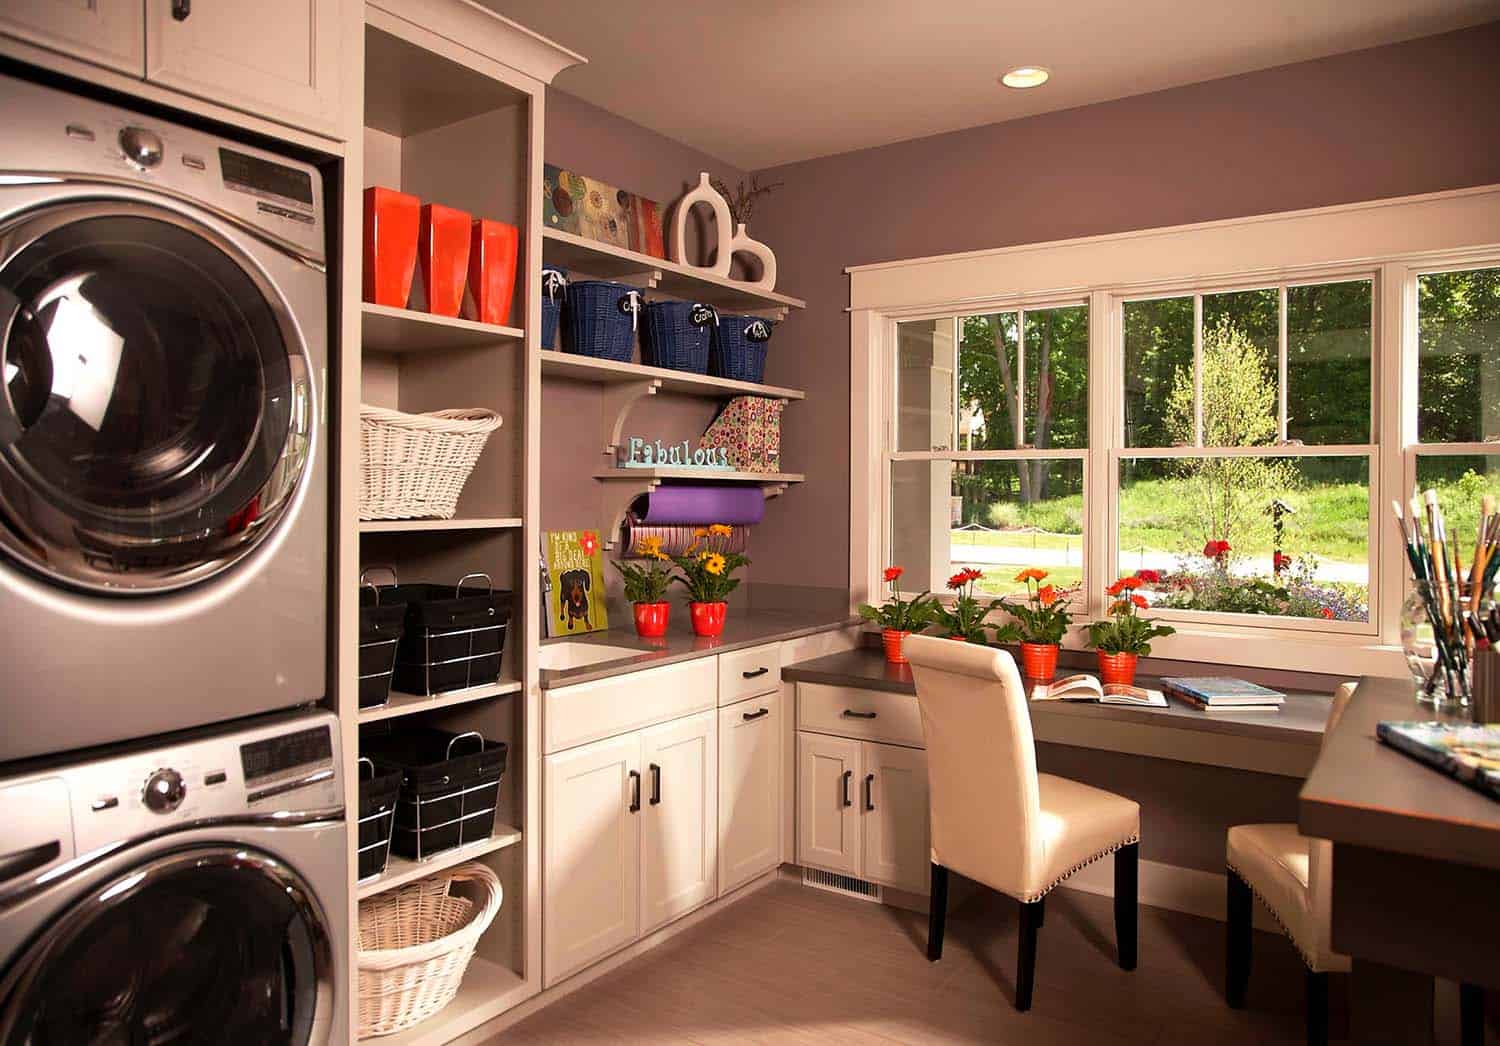 23 Incredibly Efficient And Multifunctional Laundry Room Ideas Furthermore, this ugly area by the back door entrance with incoming water pipes and ventilation fans. multifunctional laundry room ideas